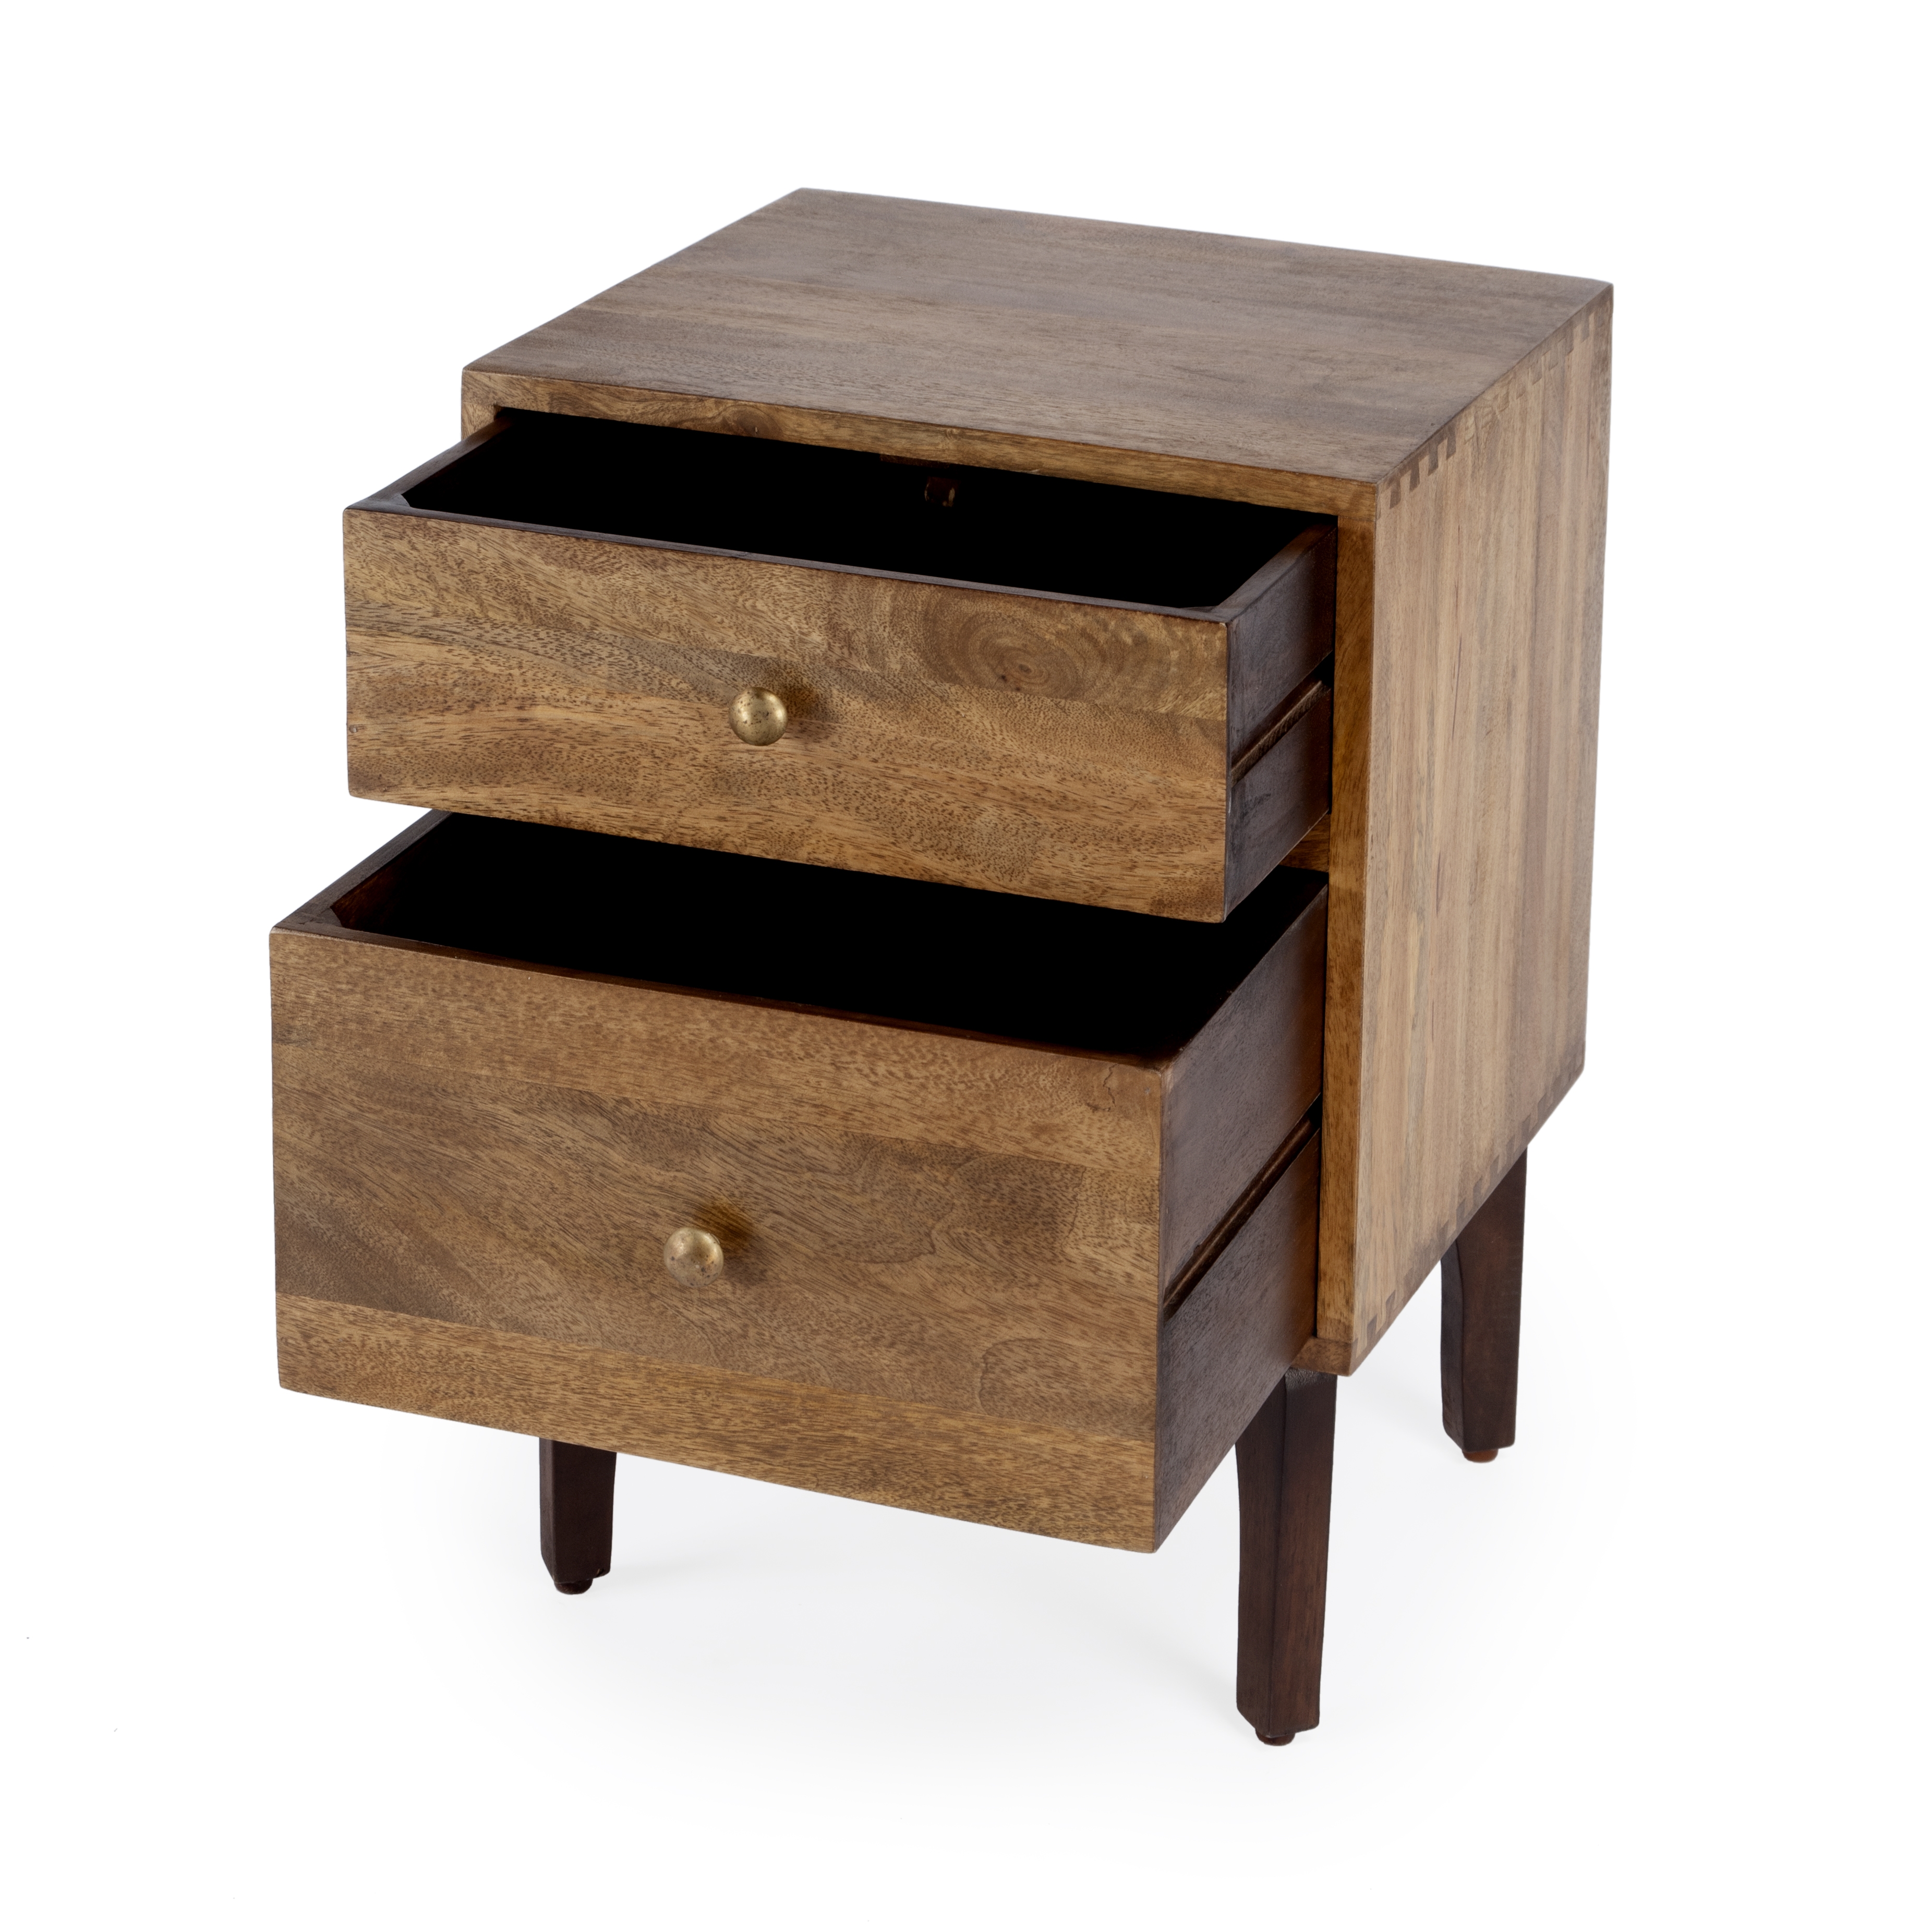 Nuance Brown End Table - Image 3